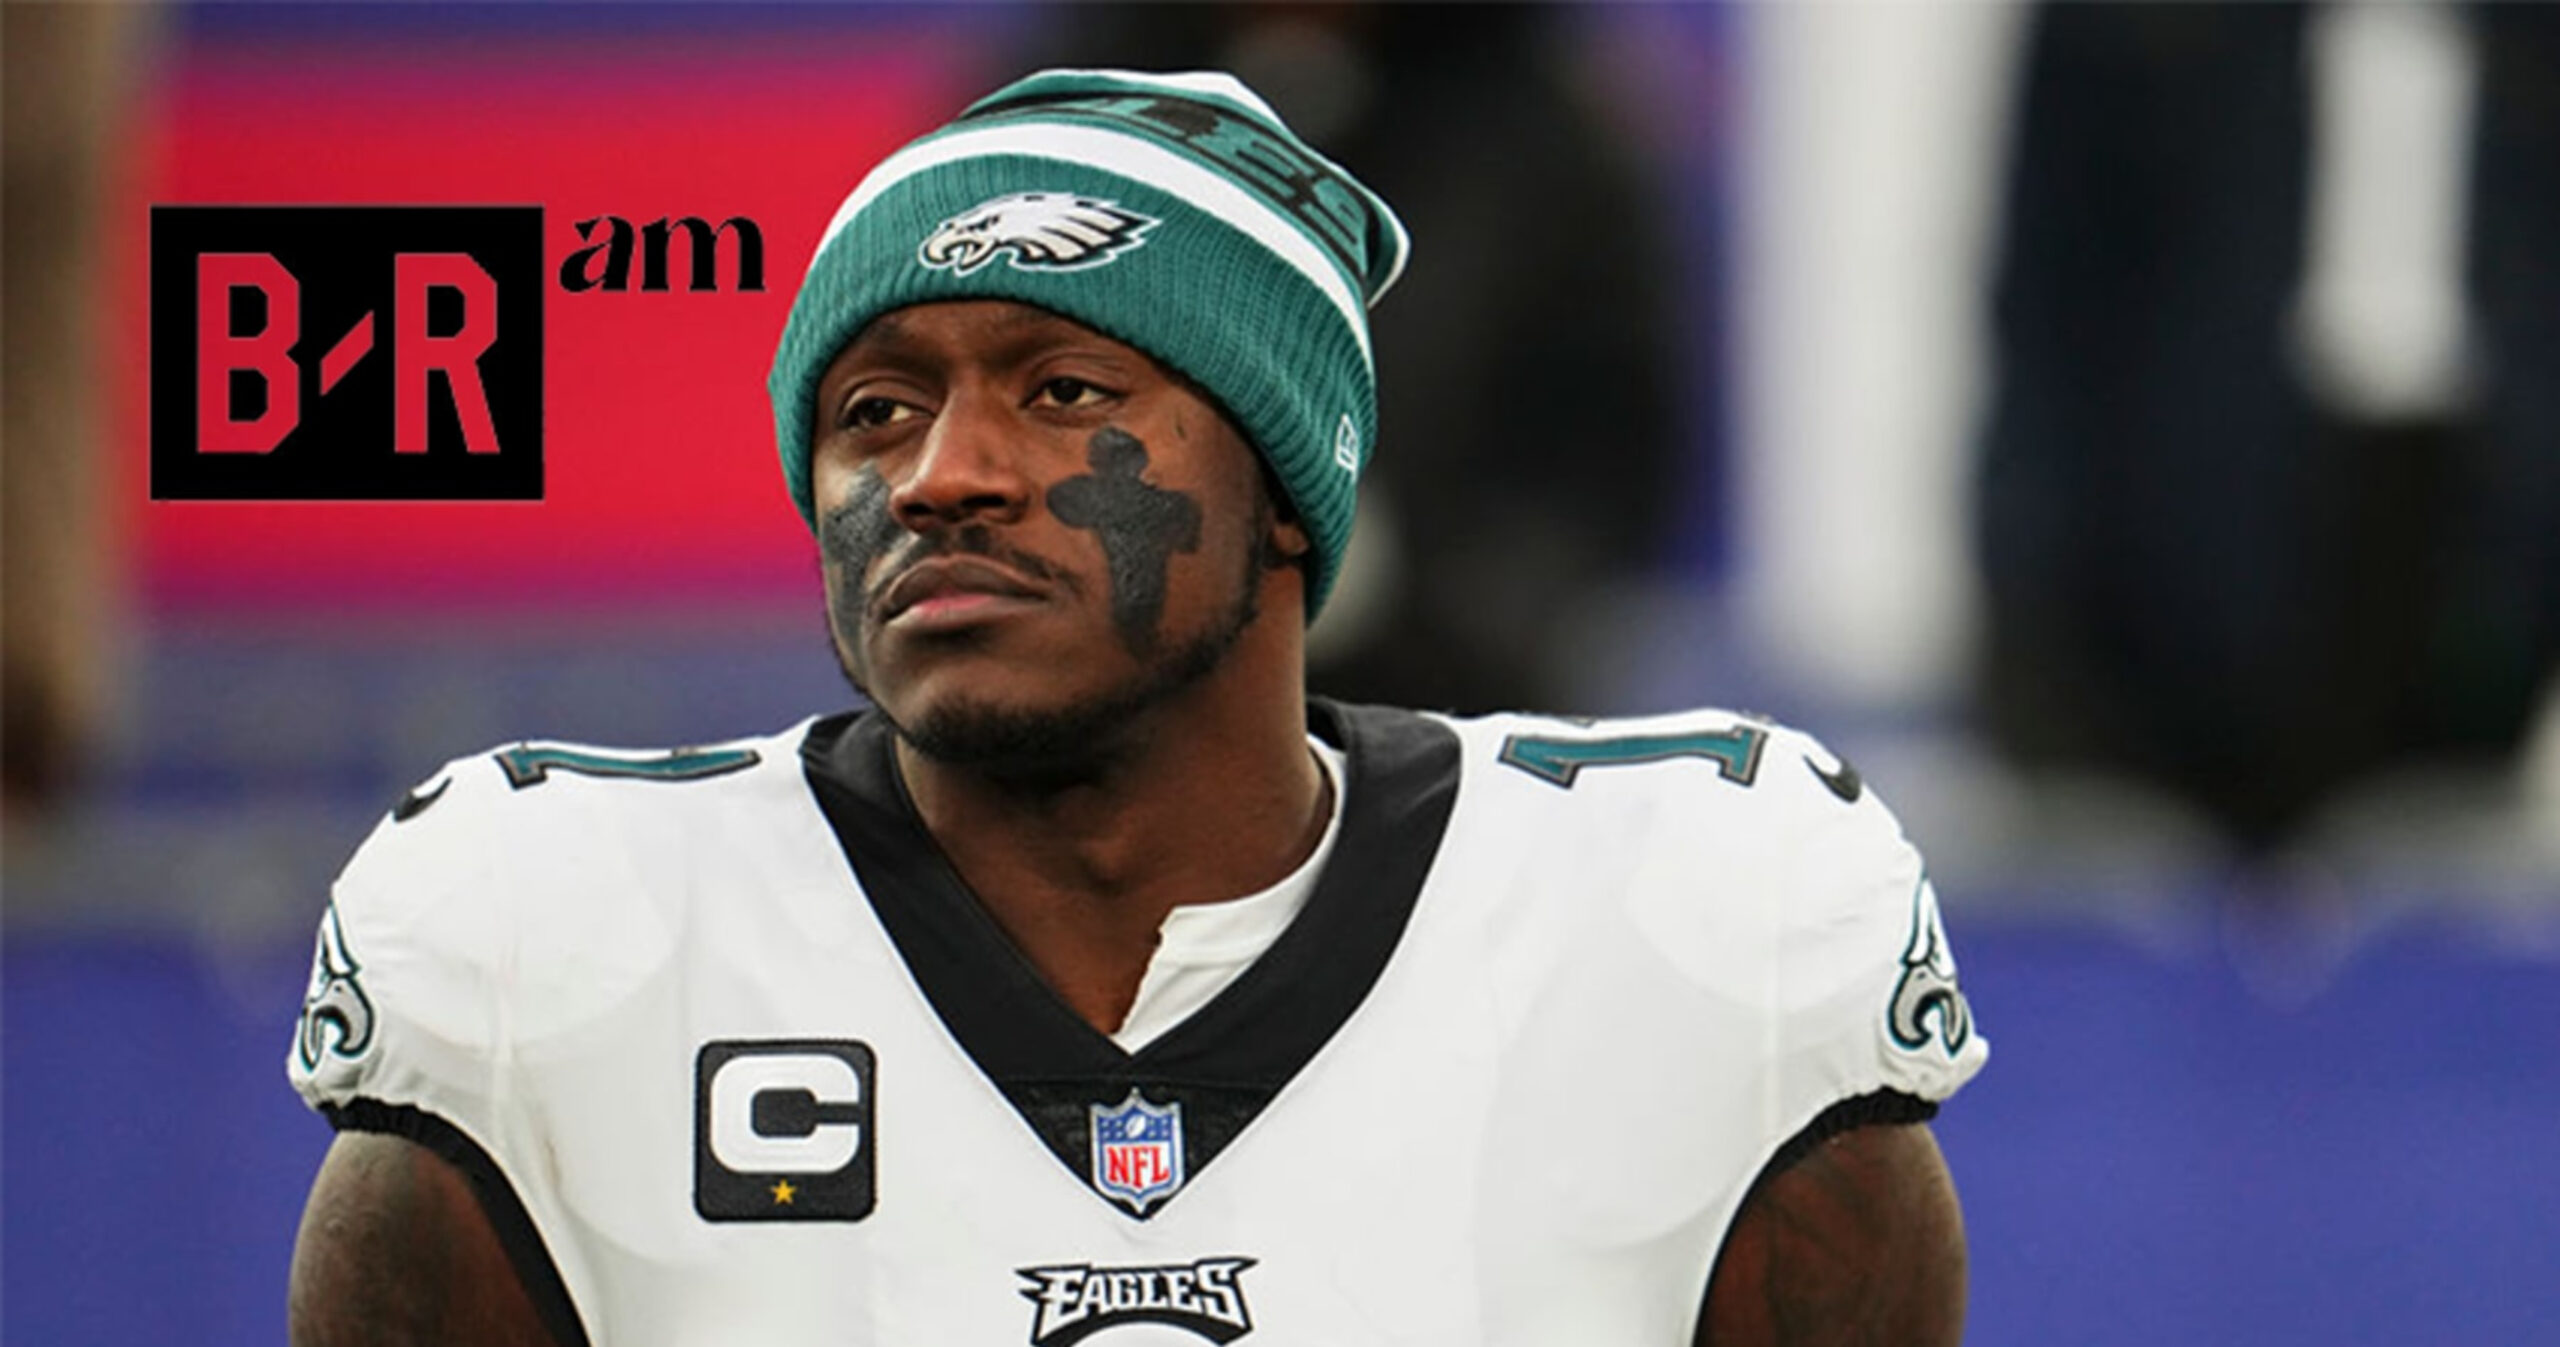 B/R AM: Eagles Fans Are Down Bad